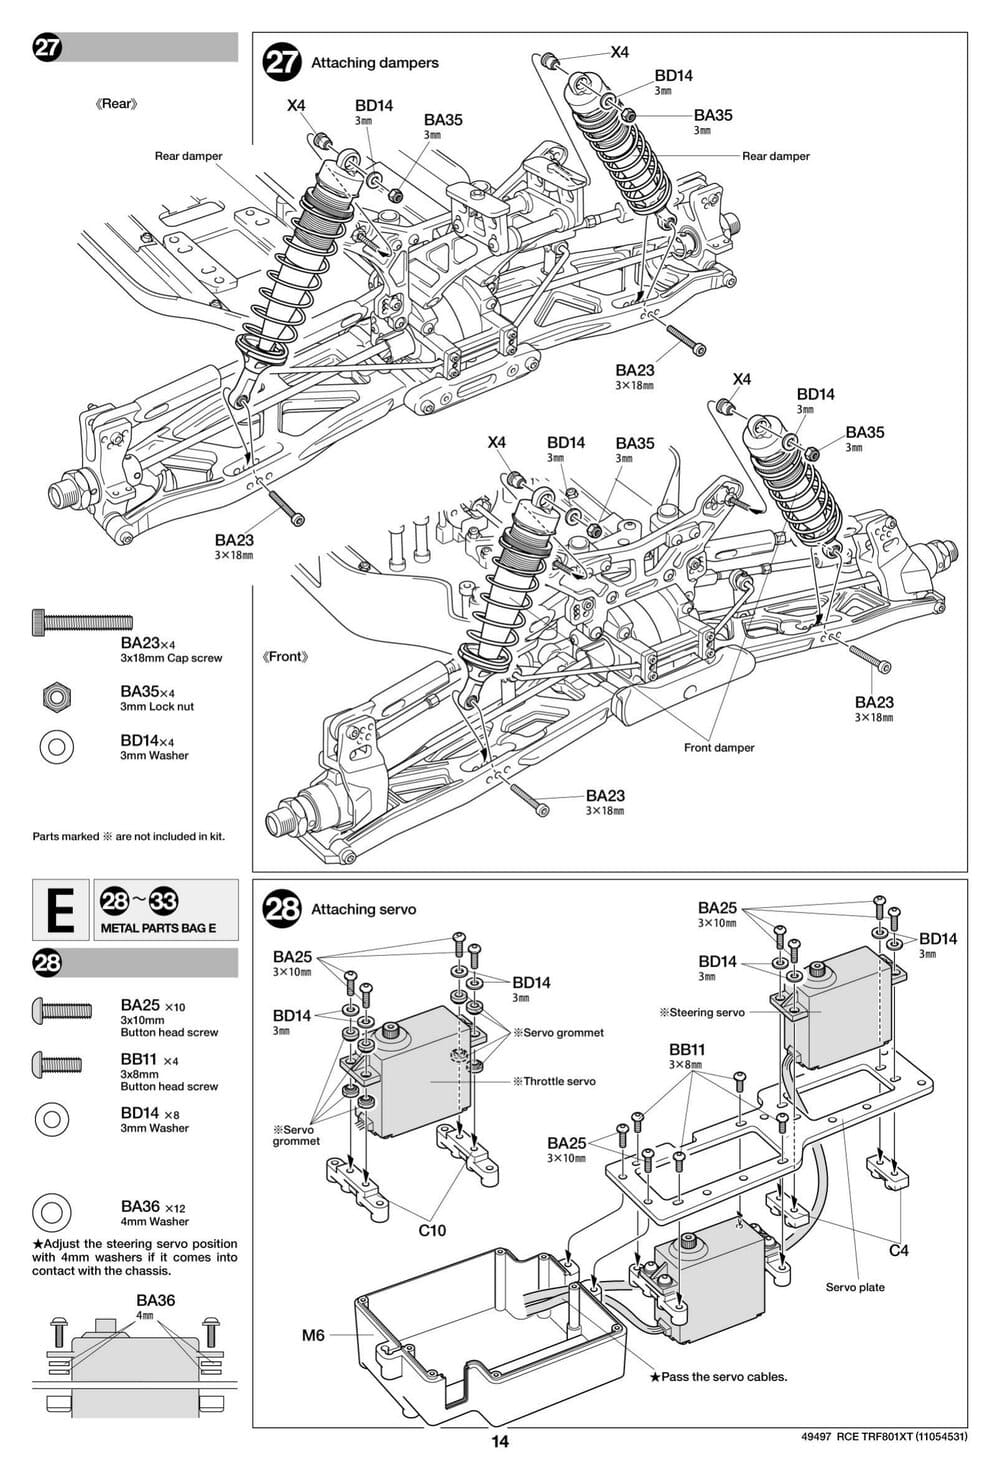 Tamiya - TRF801Xt Performance Package Version Chassis - Manual - Page 14